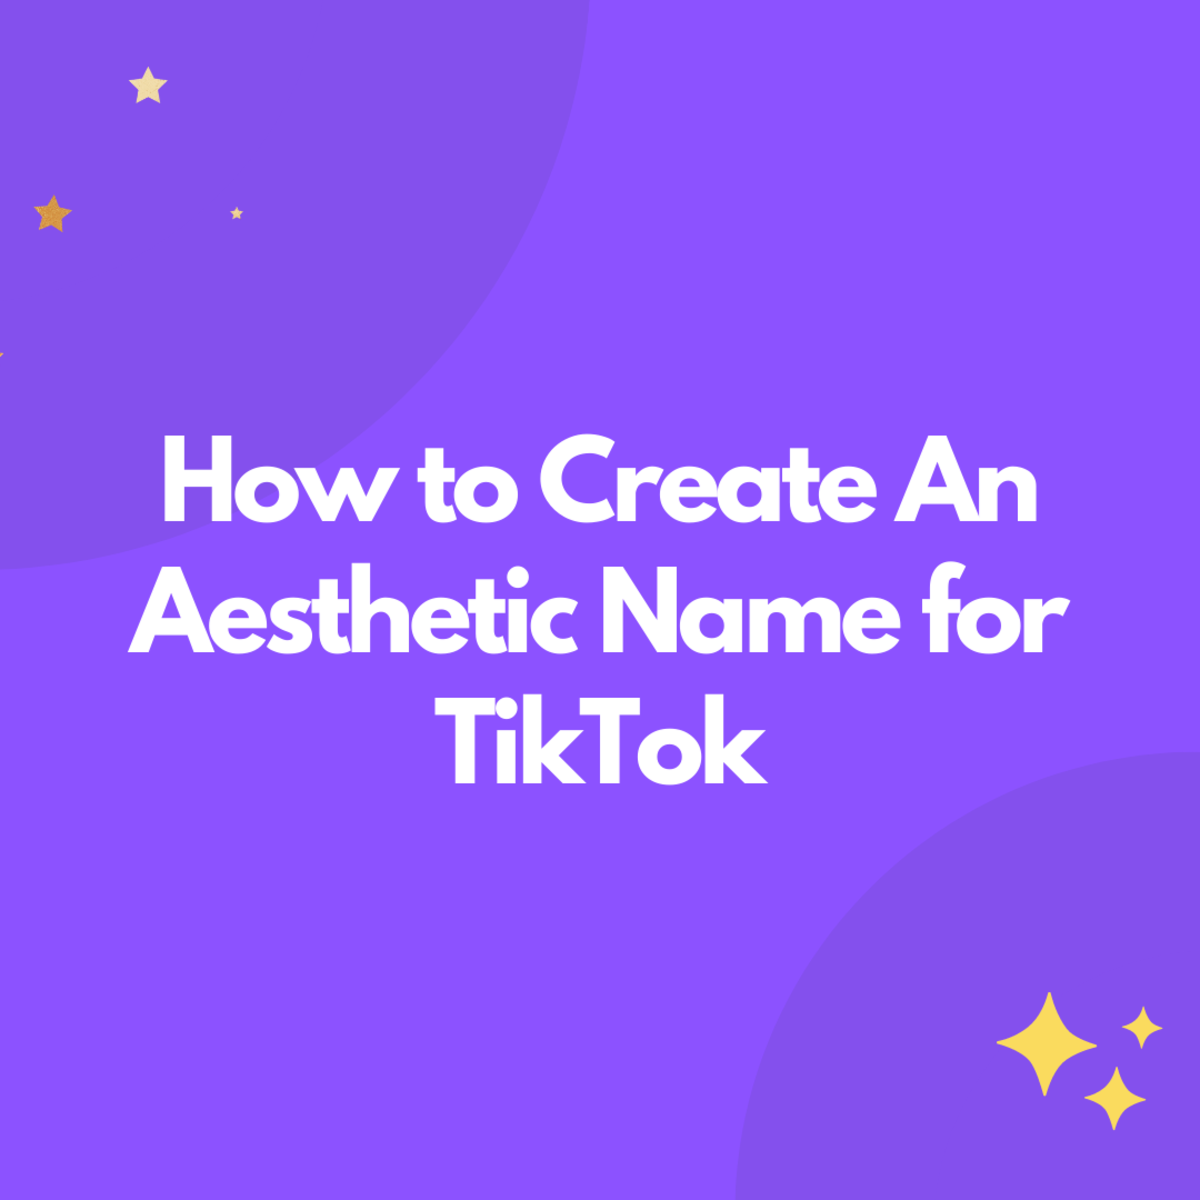 In this guide, we're going to take a look at how to create an aesthetic and cool name for TikTok!